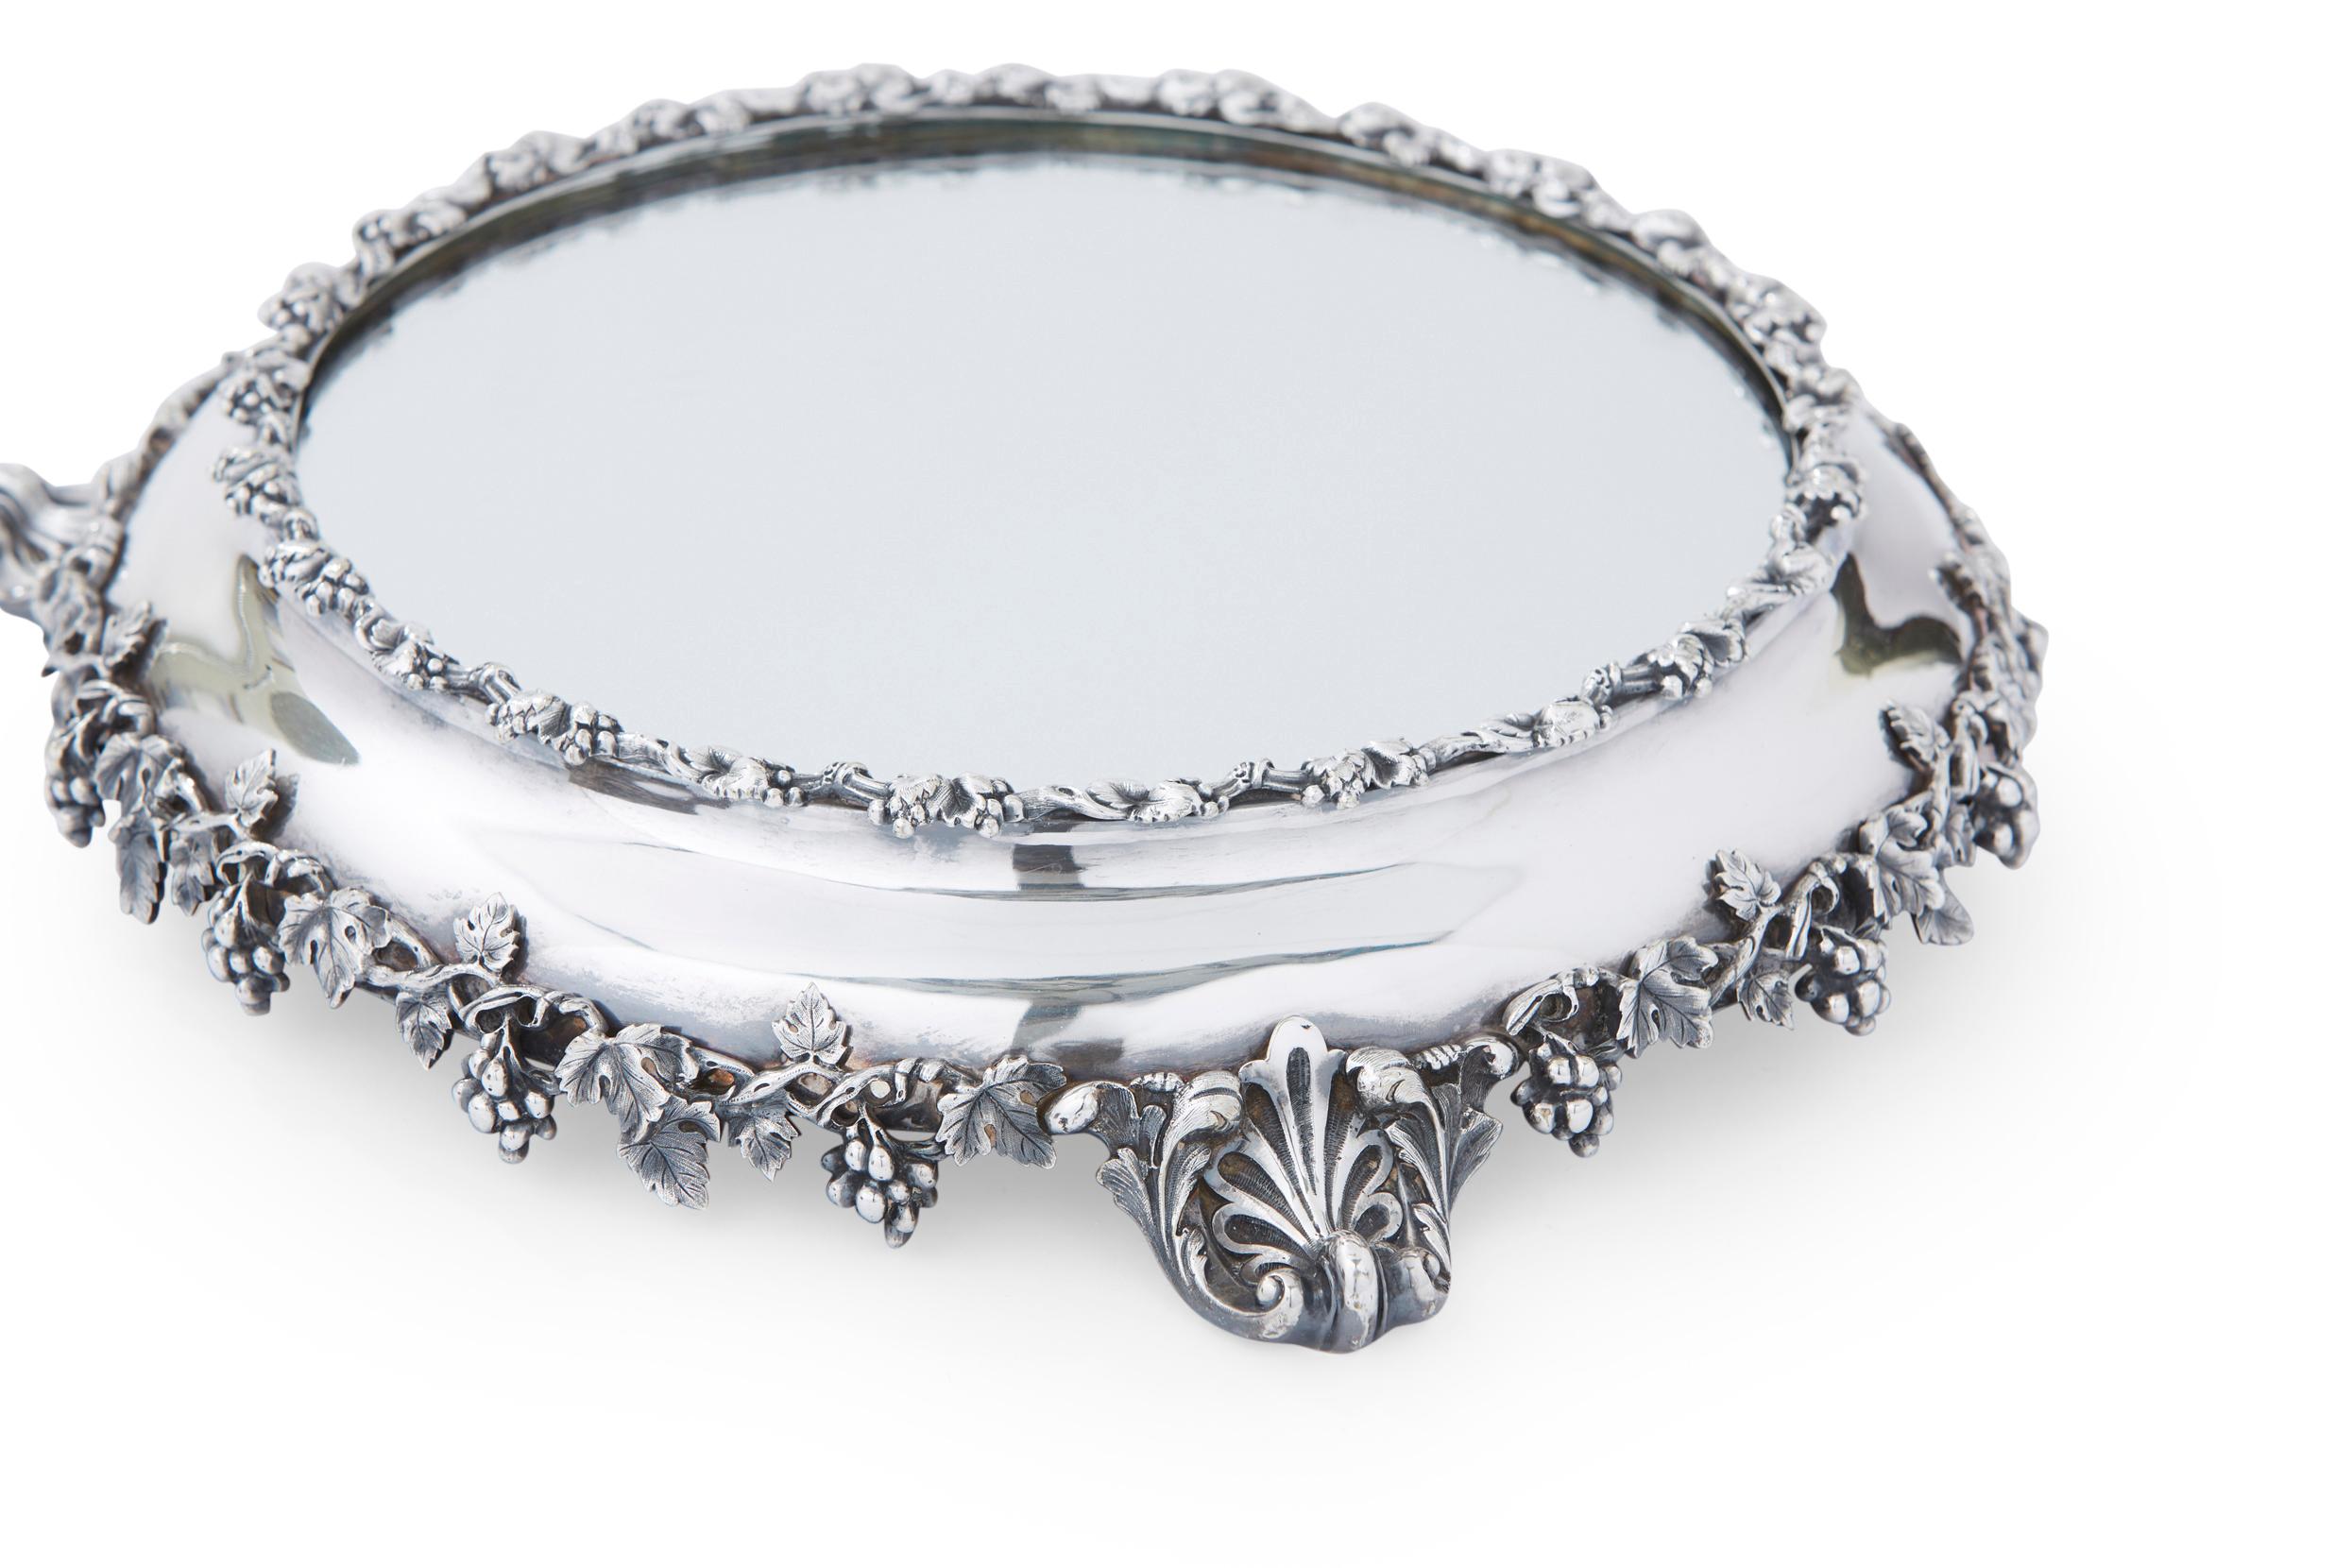 English silver mounted framed mirrored footed vanity tray with exterior floral design details. The mirrored vanity tray is in great antique condition. Minor wear consistent with age / use. The tray stands about 15 1/2 inches diameter x 3 inches high.